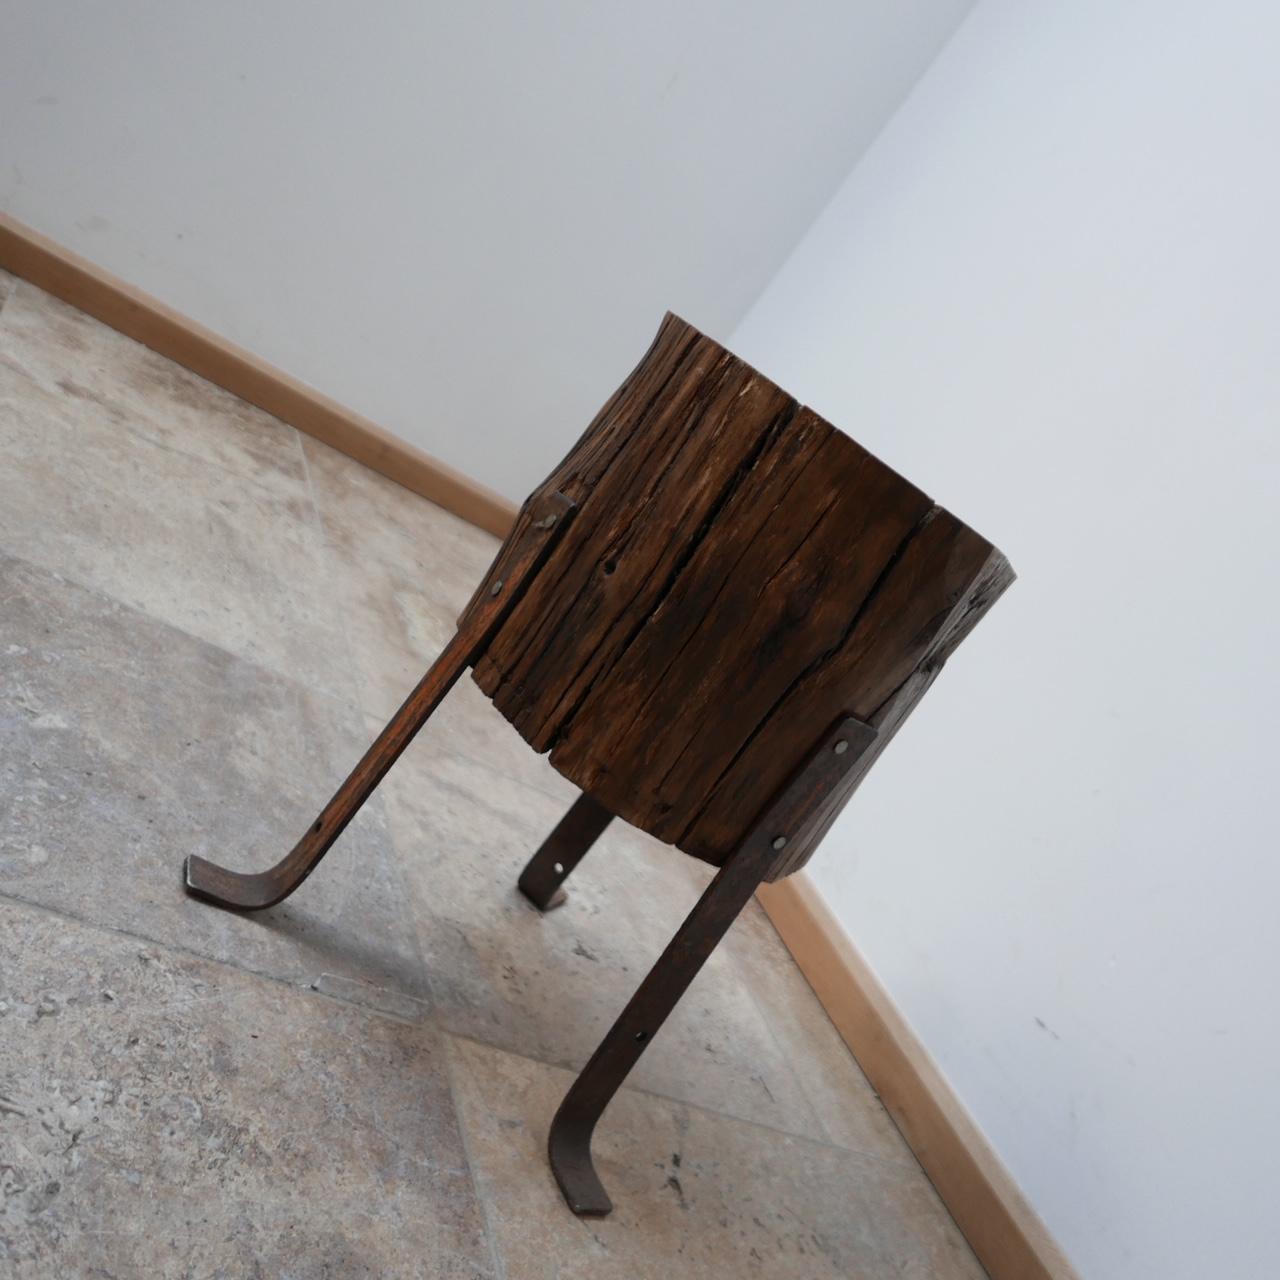 An unusual naively made tree stump side table. 

England, c1970s. 

Iron tripod feet. 

Naively made but good condition. 

Location: London Gallery. 

Dimensions: 33 Diameter x 47 H in cm. The Diameter of the top is 29 cm. 

Delivery: